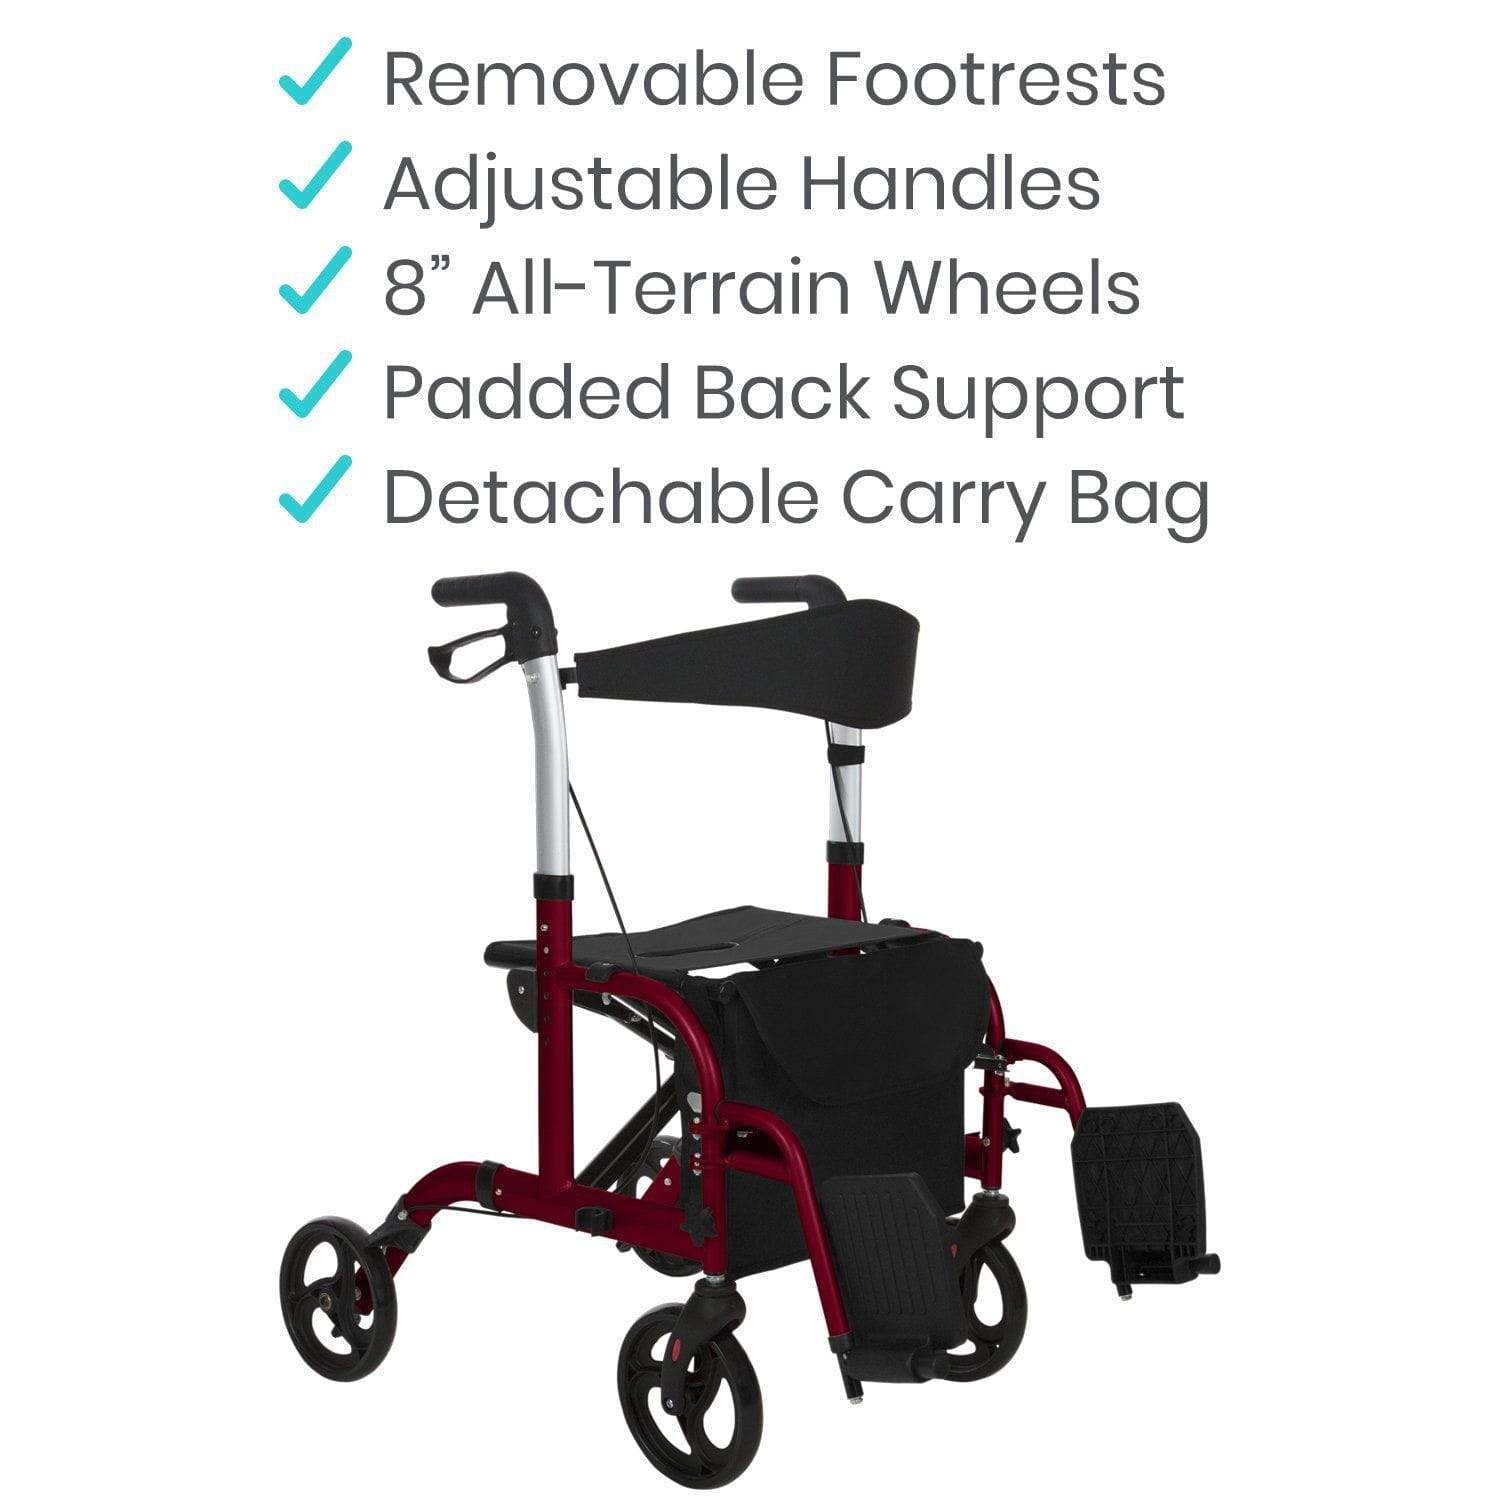 Mobility - Vive - Wasatch Medical Supply